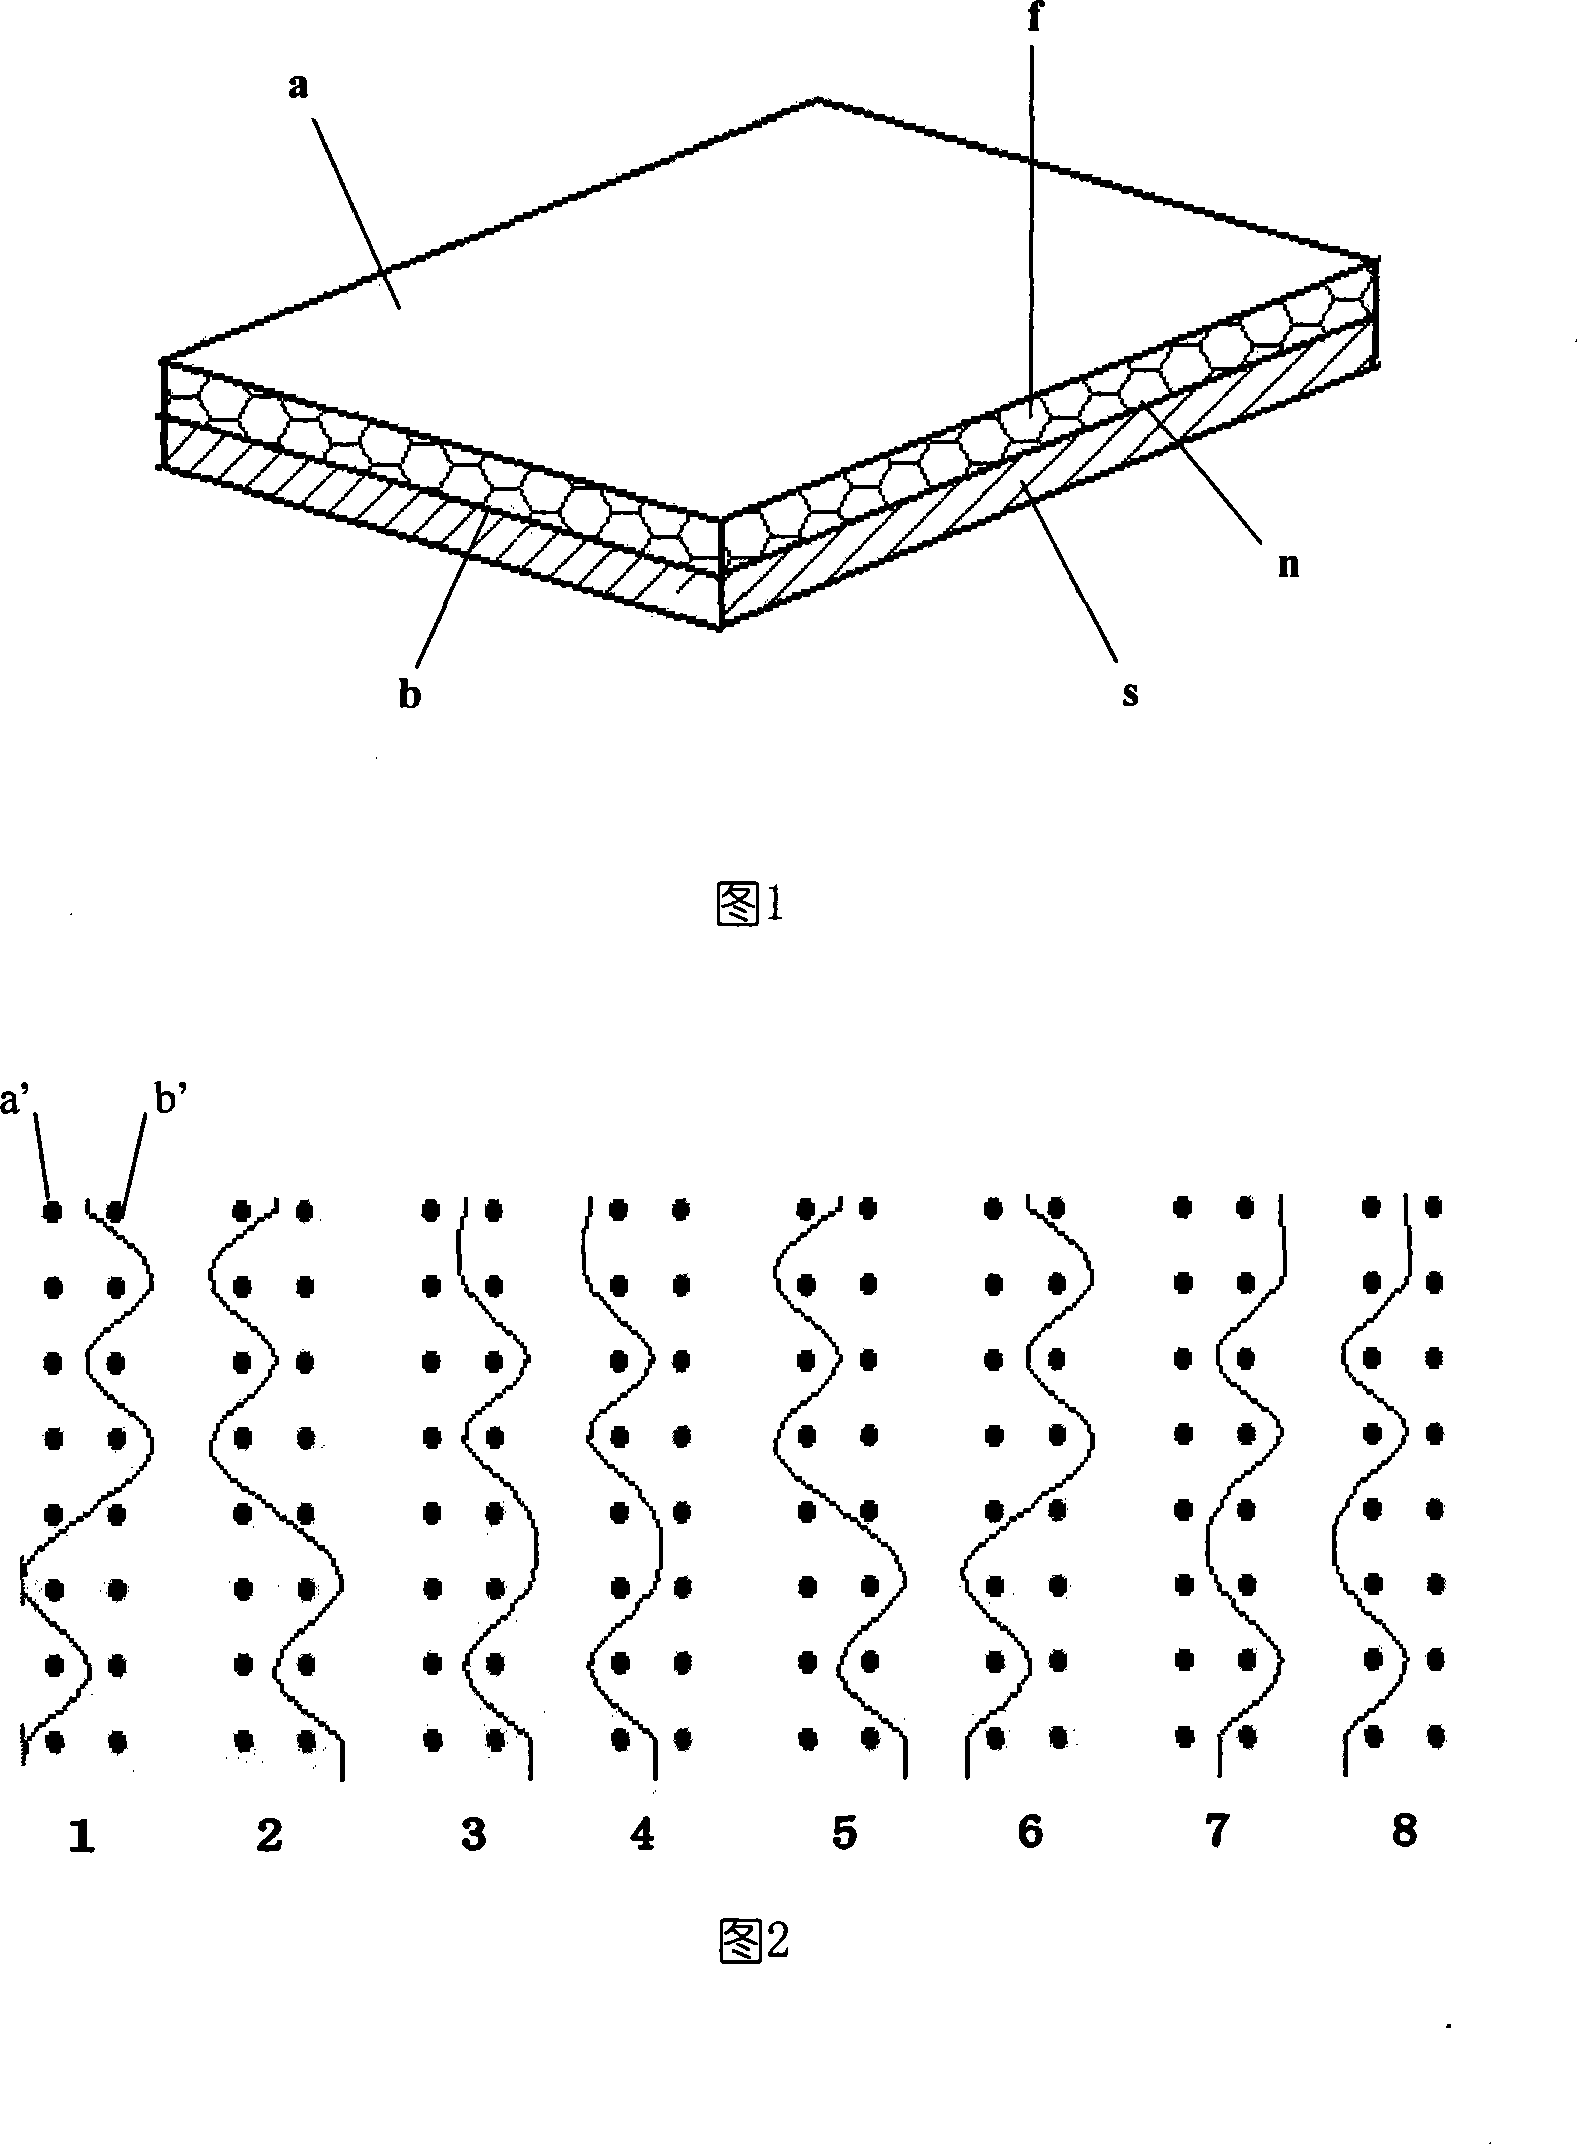 Production method for textile reinforced compound stone plate